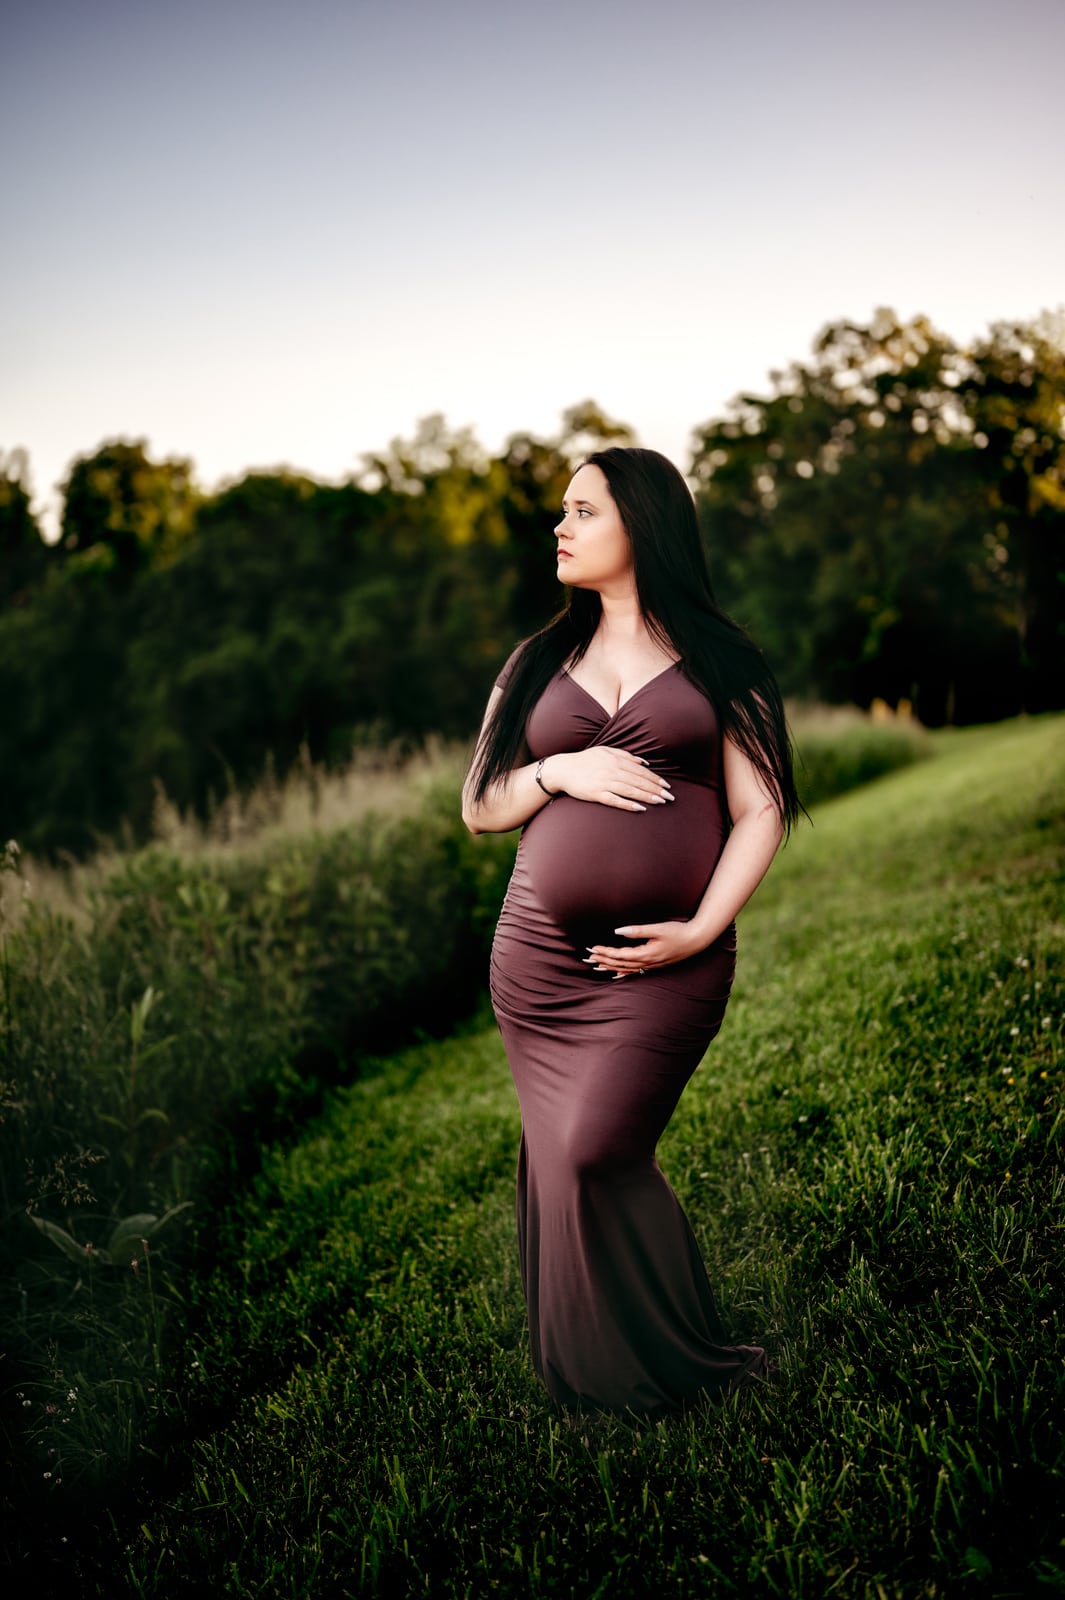 Maternity outdoors, Mom is wearing a fitted purple dress and holding her baby bump with green trees and grass all around her, looking off in the distance.